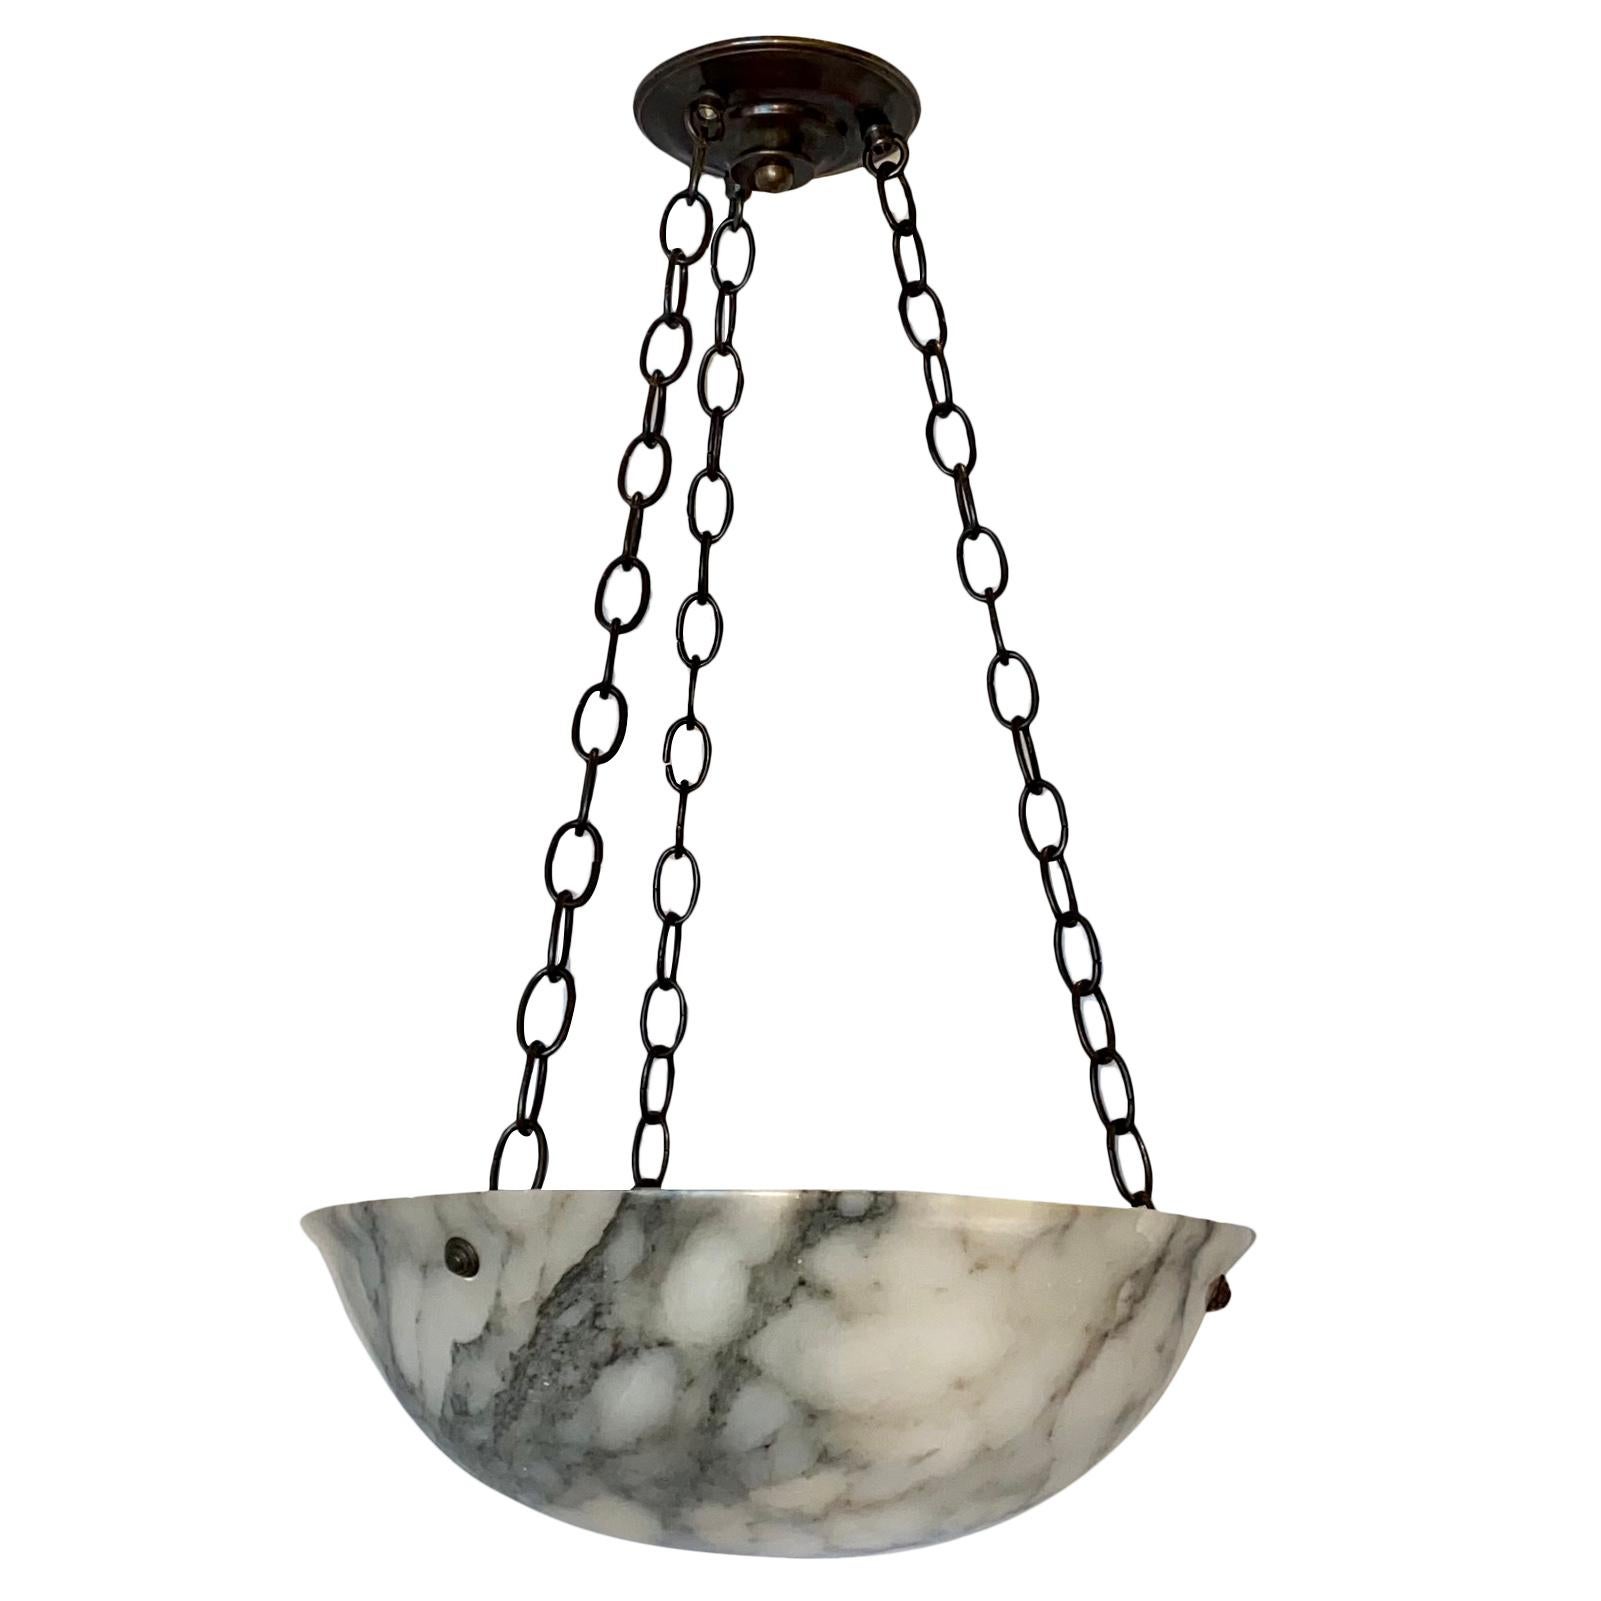 A circa 1920s Italian carved alabaster light fixture with three interior lights.

Measurements:
Current drop 26